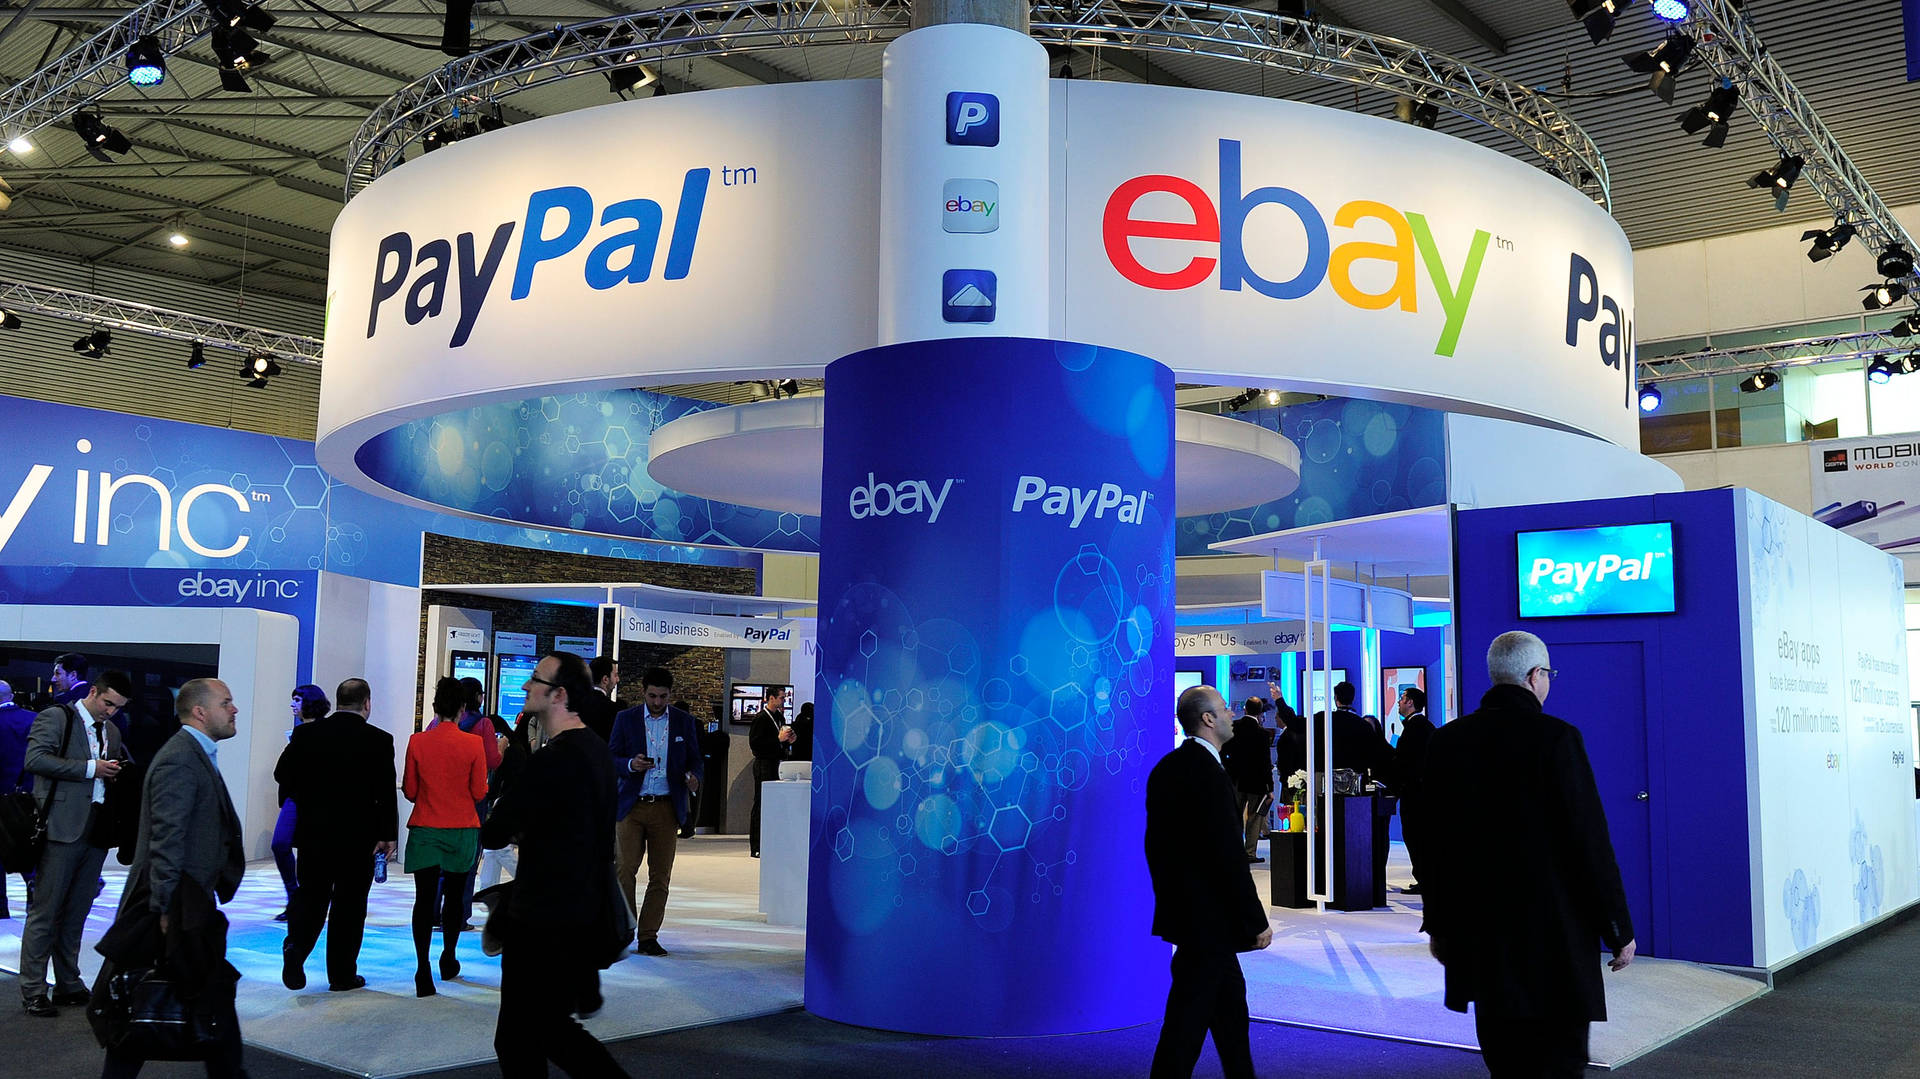 Paypal Ebay Booth Background